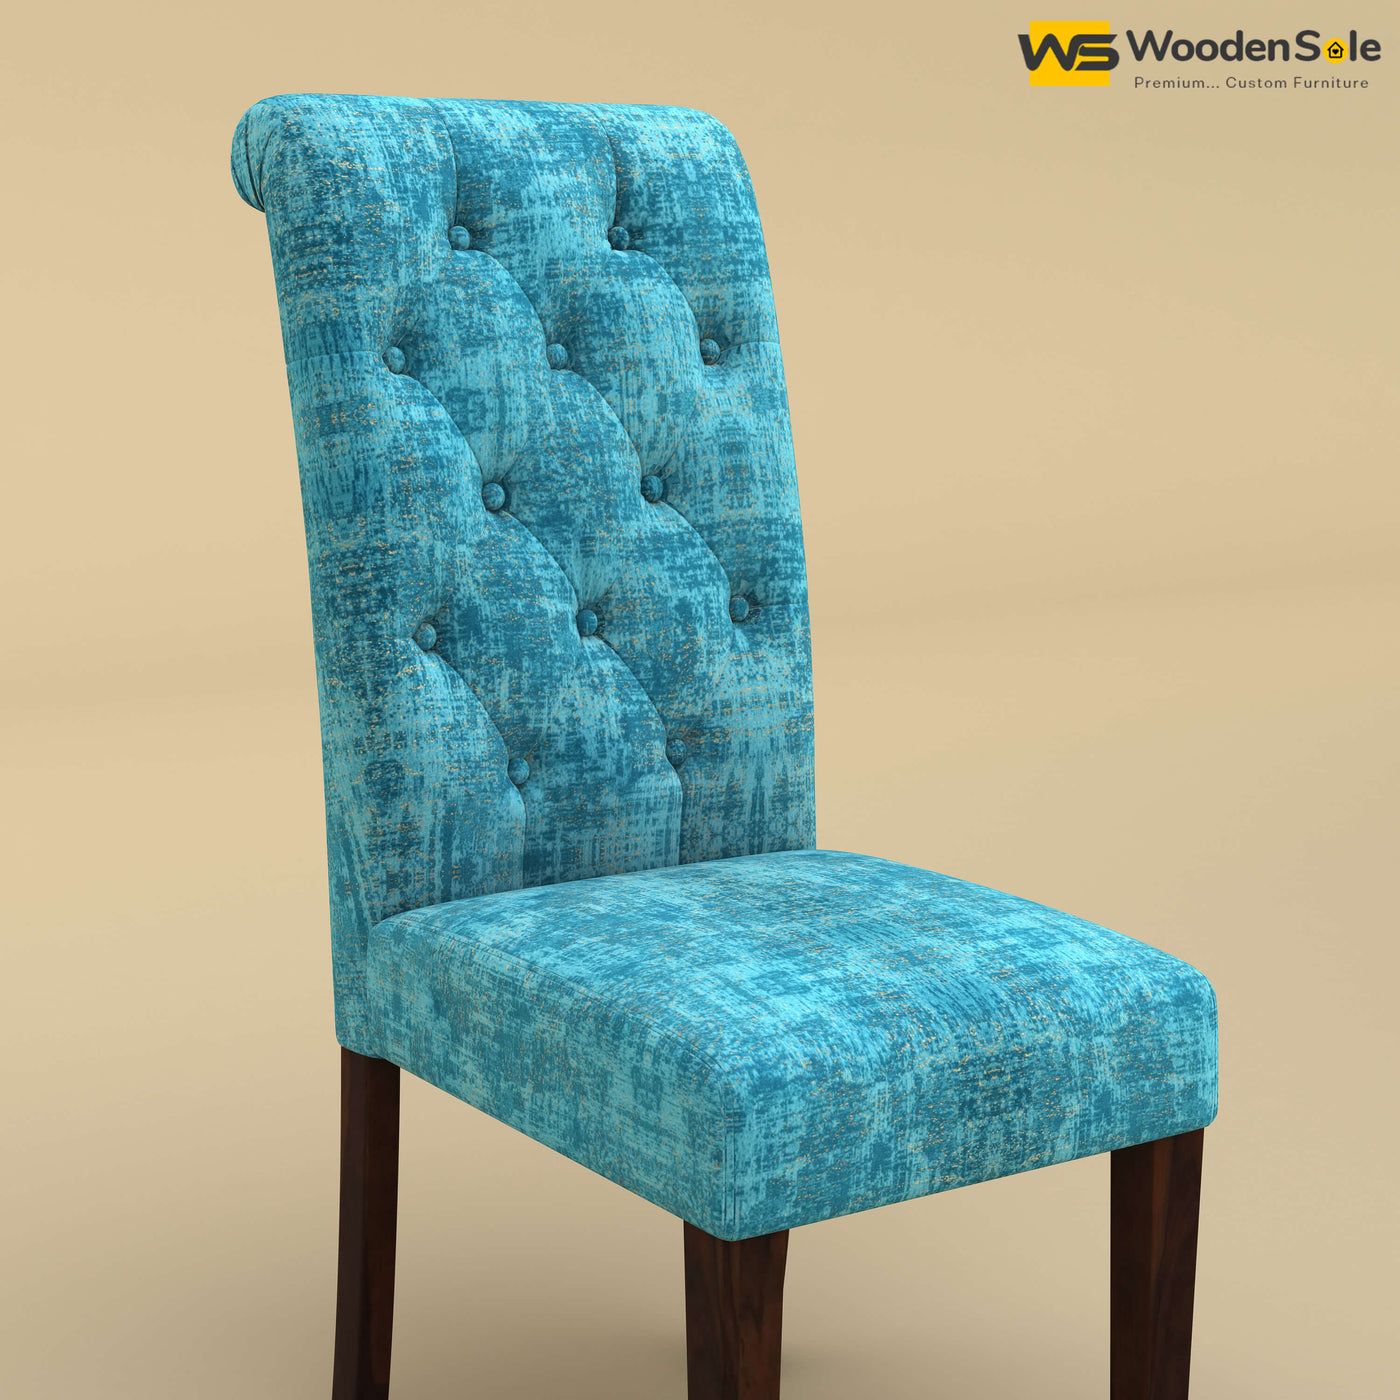 Elliot Dining Chair (Cotton, Teal Blue)